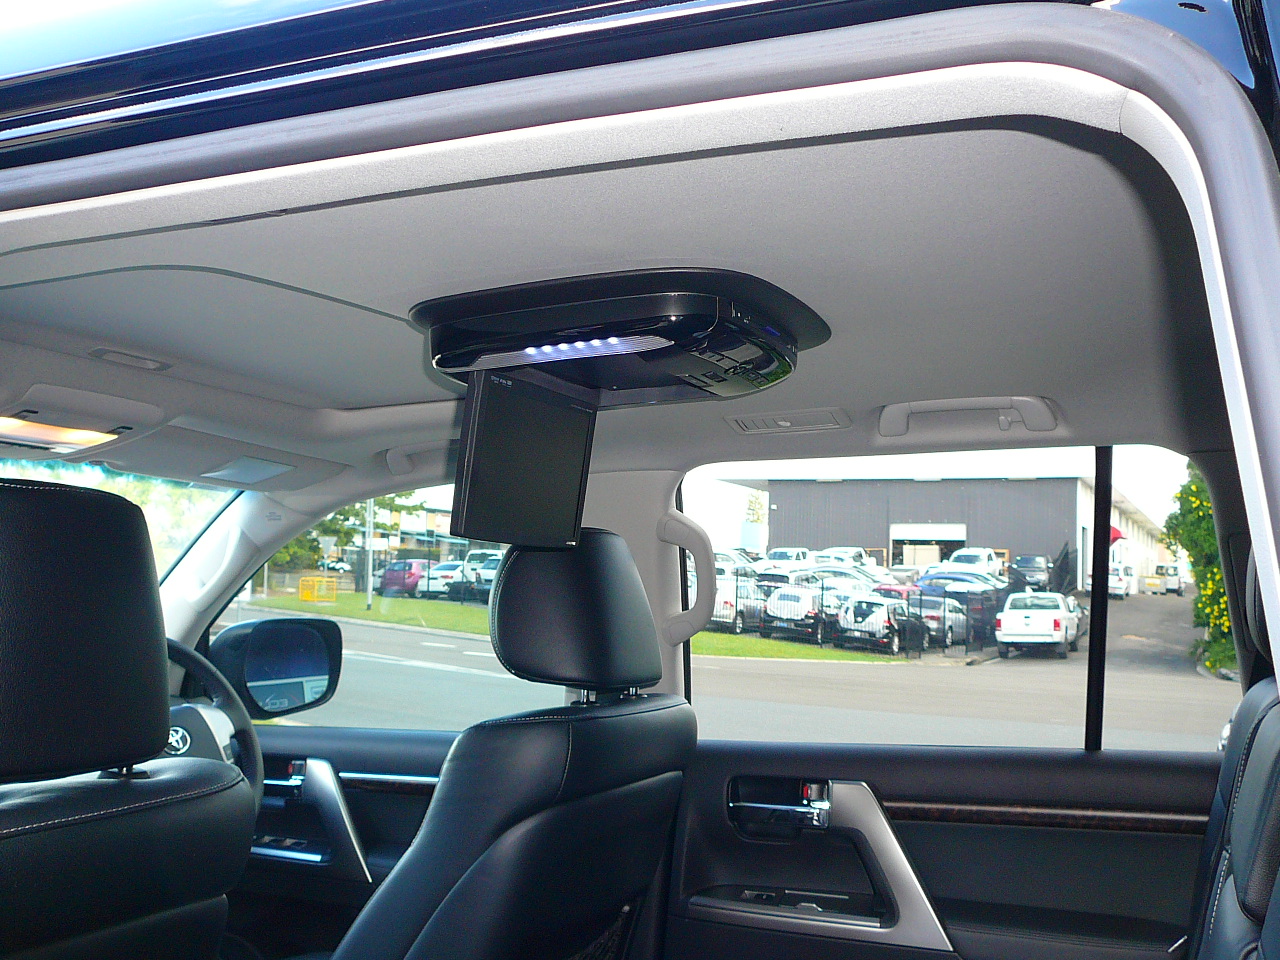 Toyota Landcruiser 200 Series with Sunroof – Installation of an Alpine DVD Roof Screen